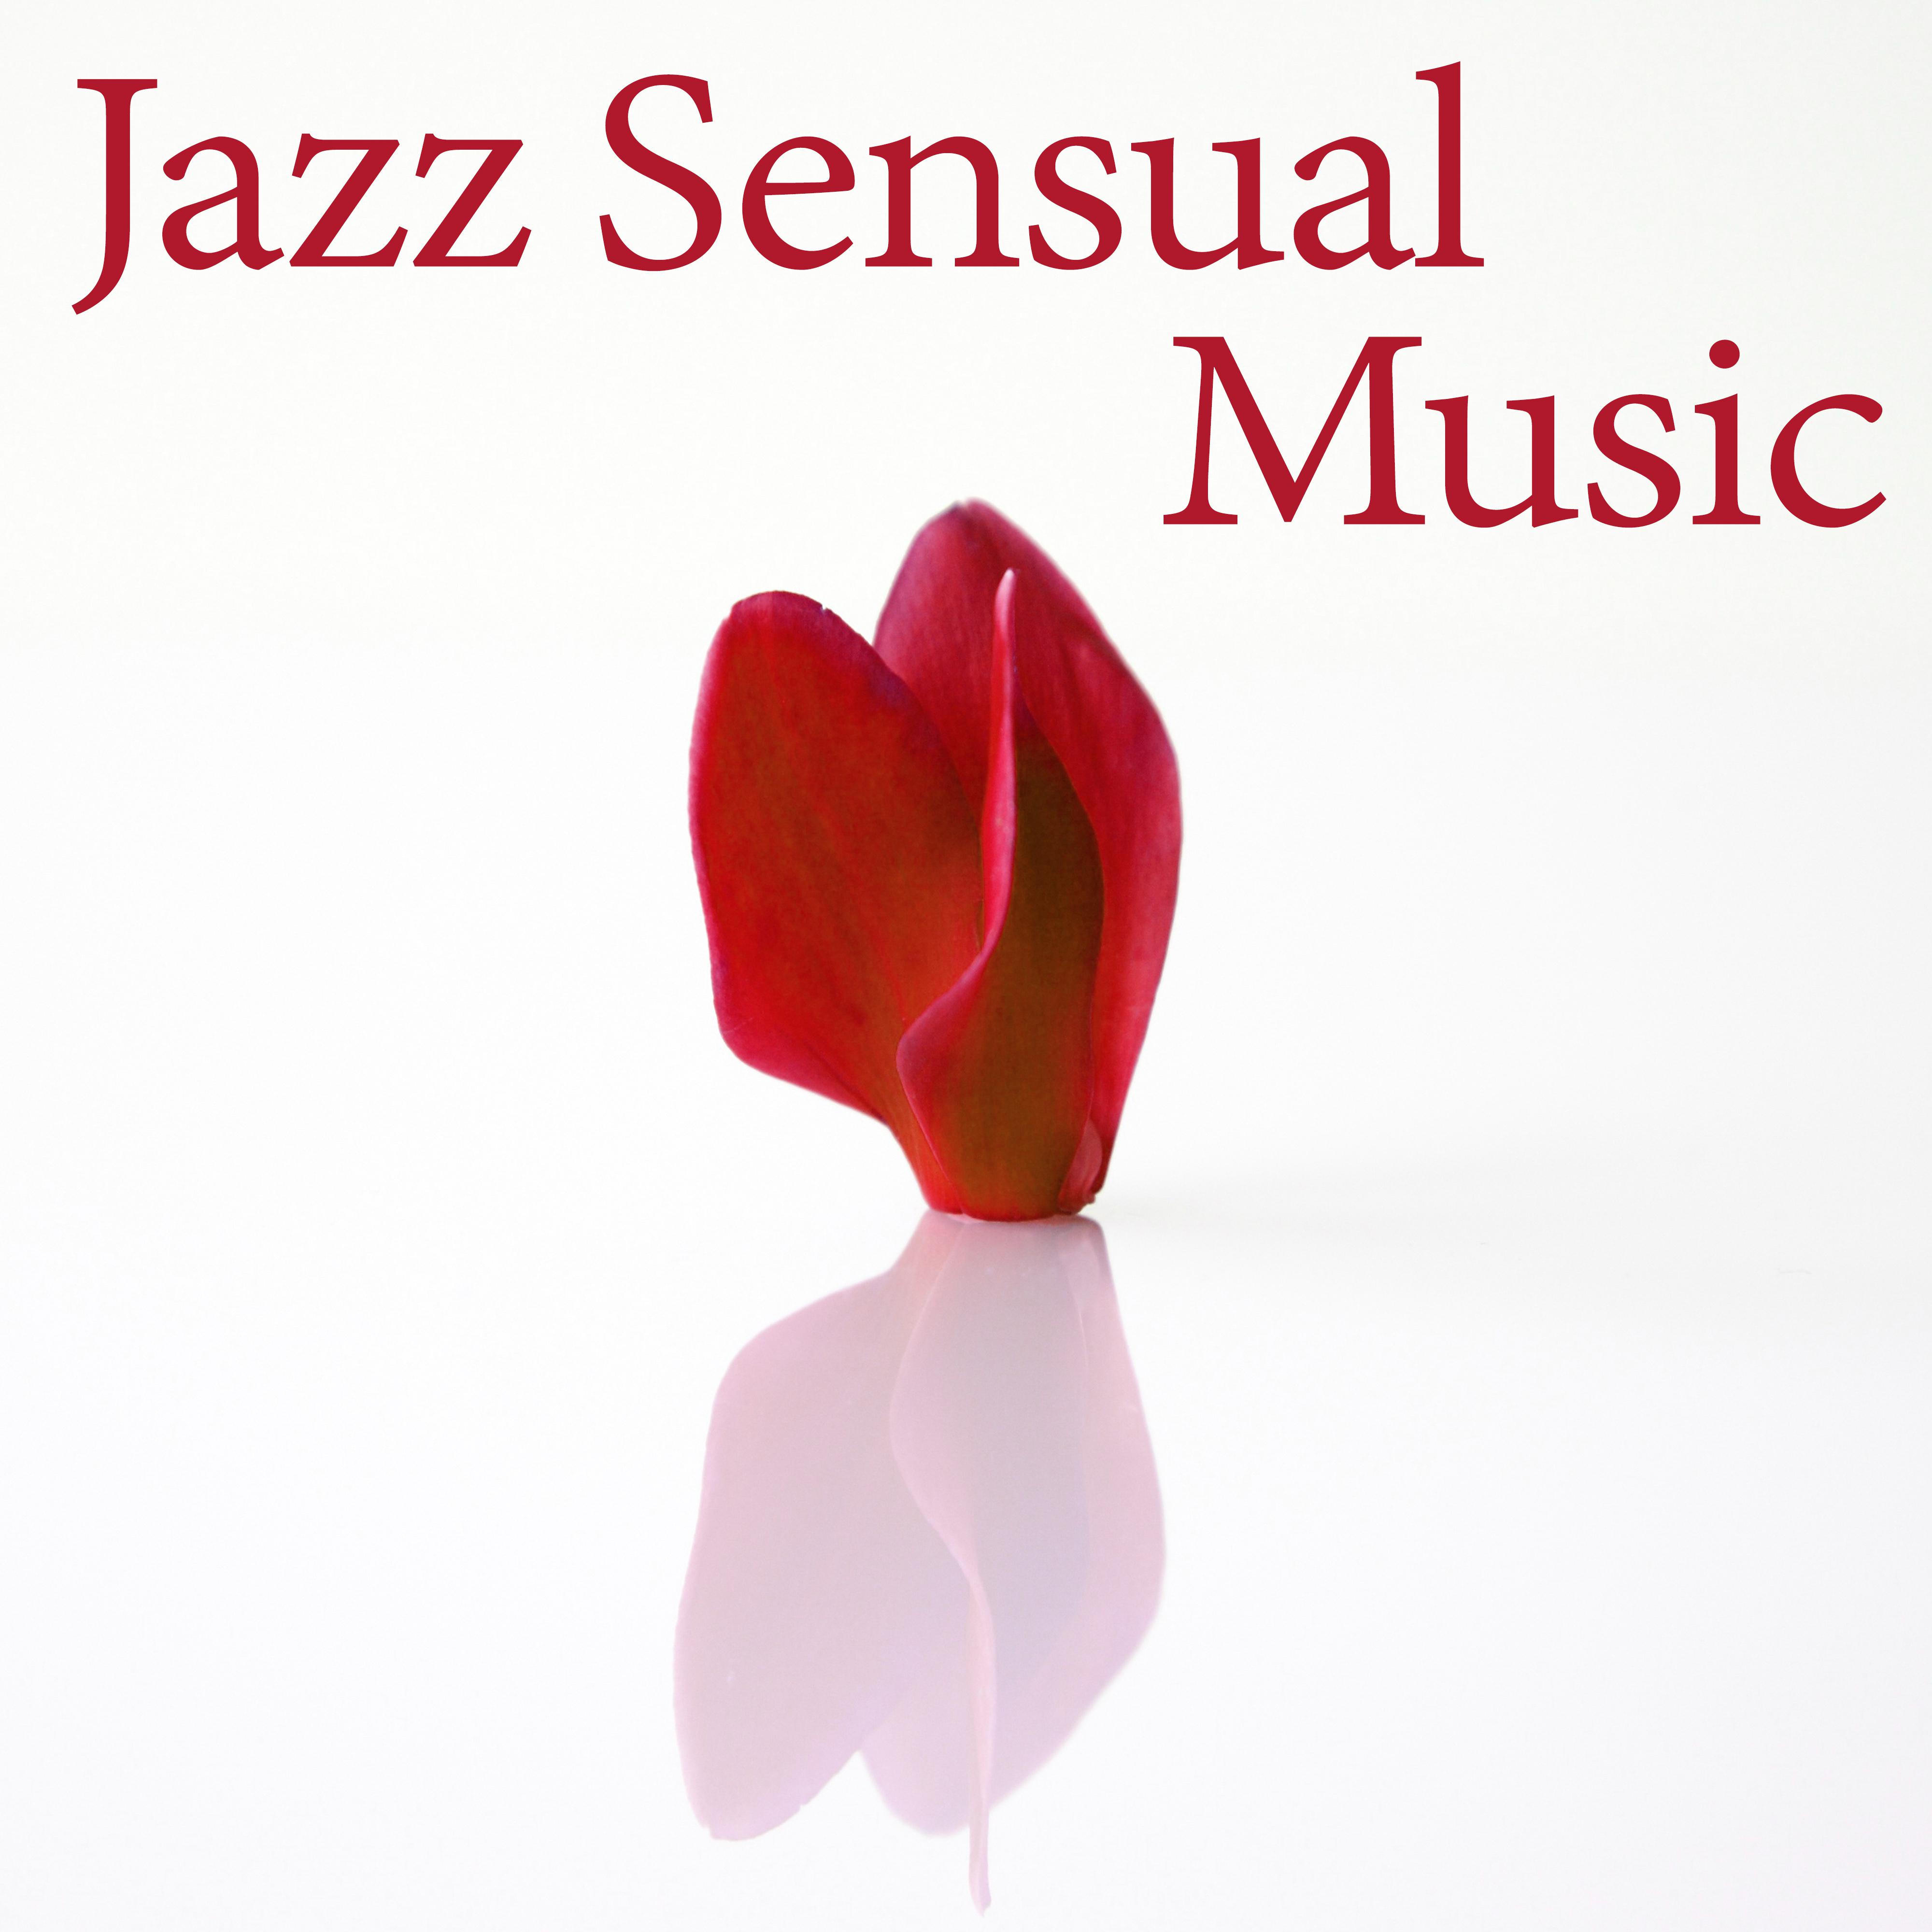 Jazz Sensual Music – Easy Listening, Soft Music for Lovers, Mellow Jazz After Dark